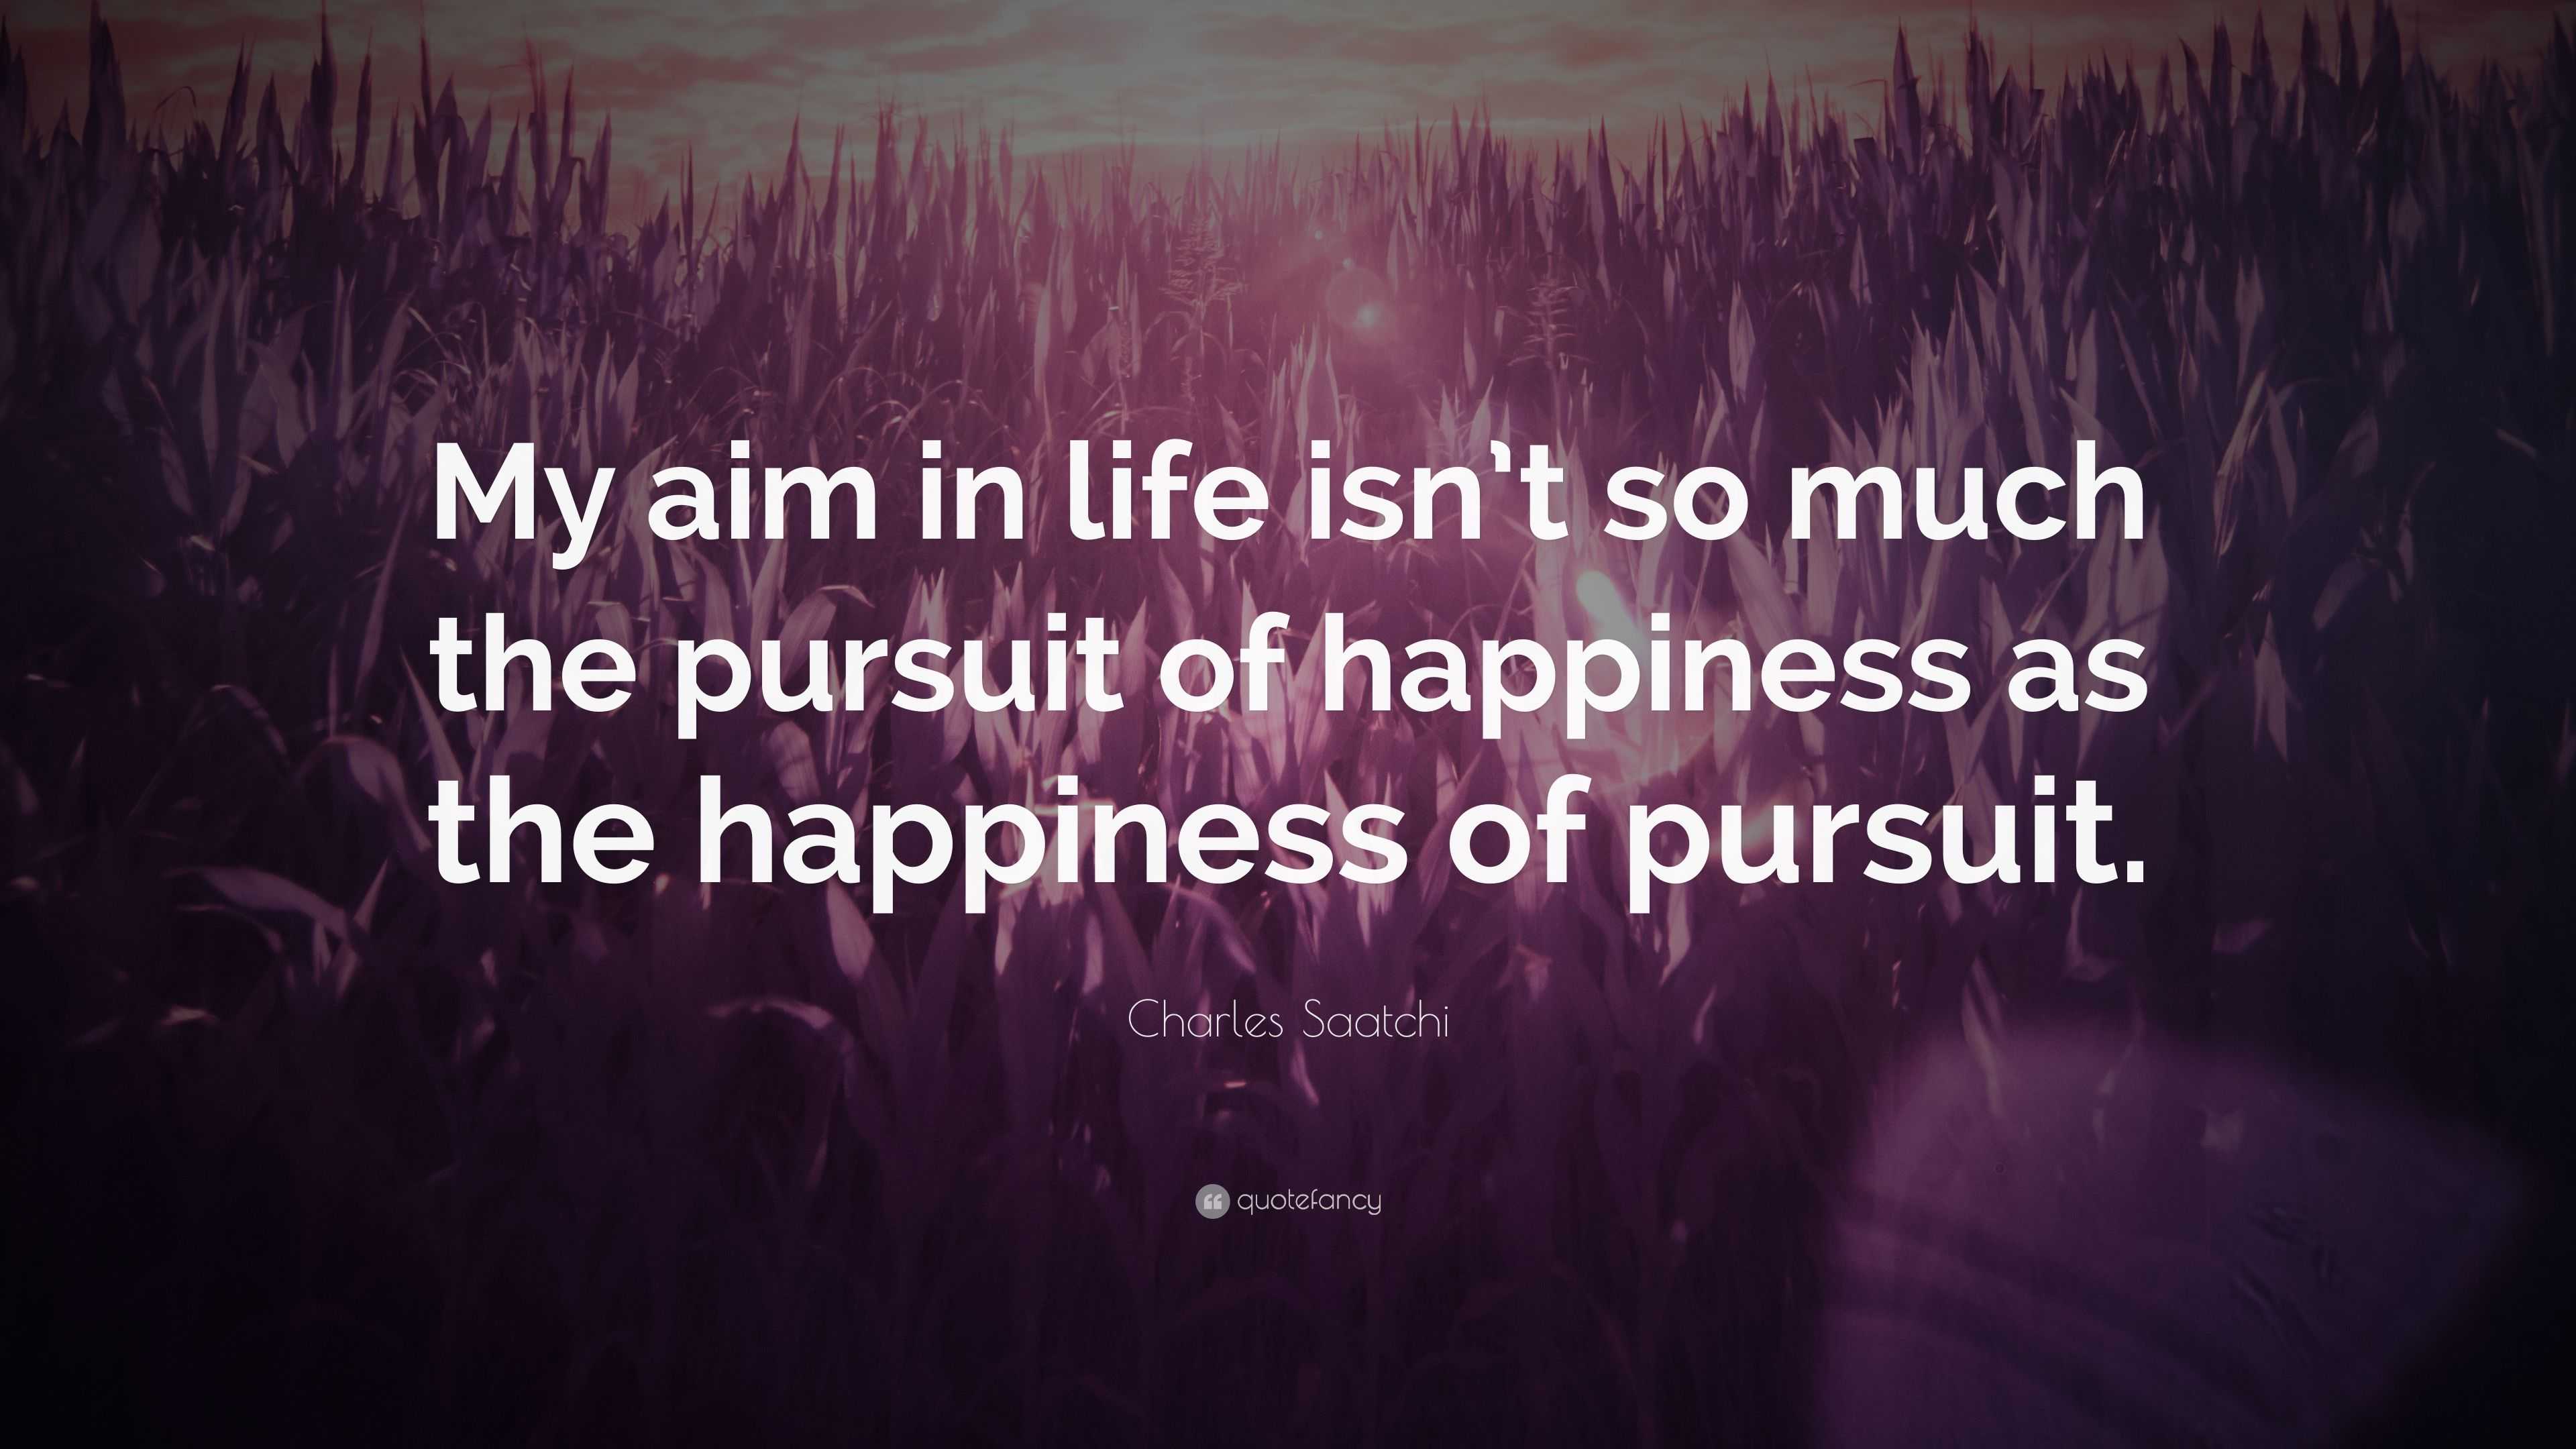 Charles Saatchi Quote: “My aim in life isn’t so much the pursuit of